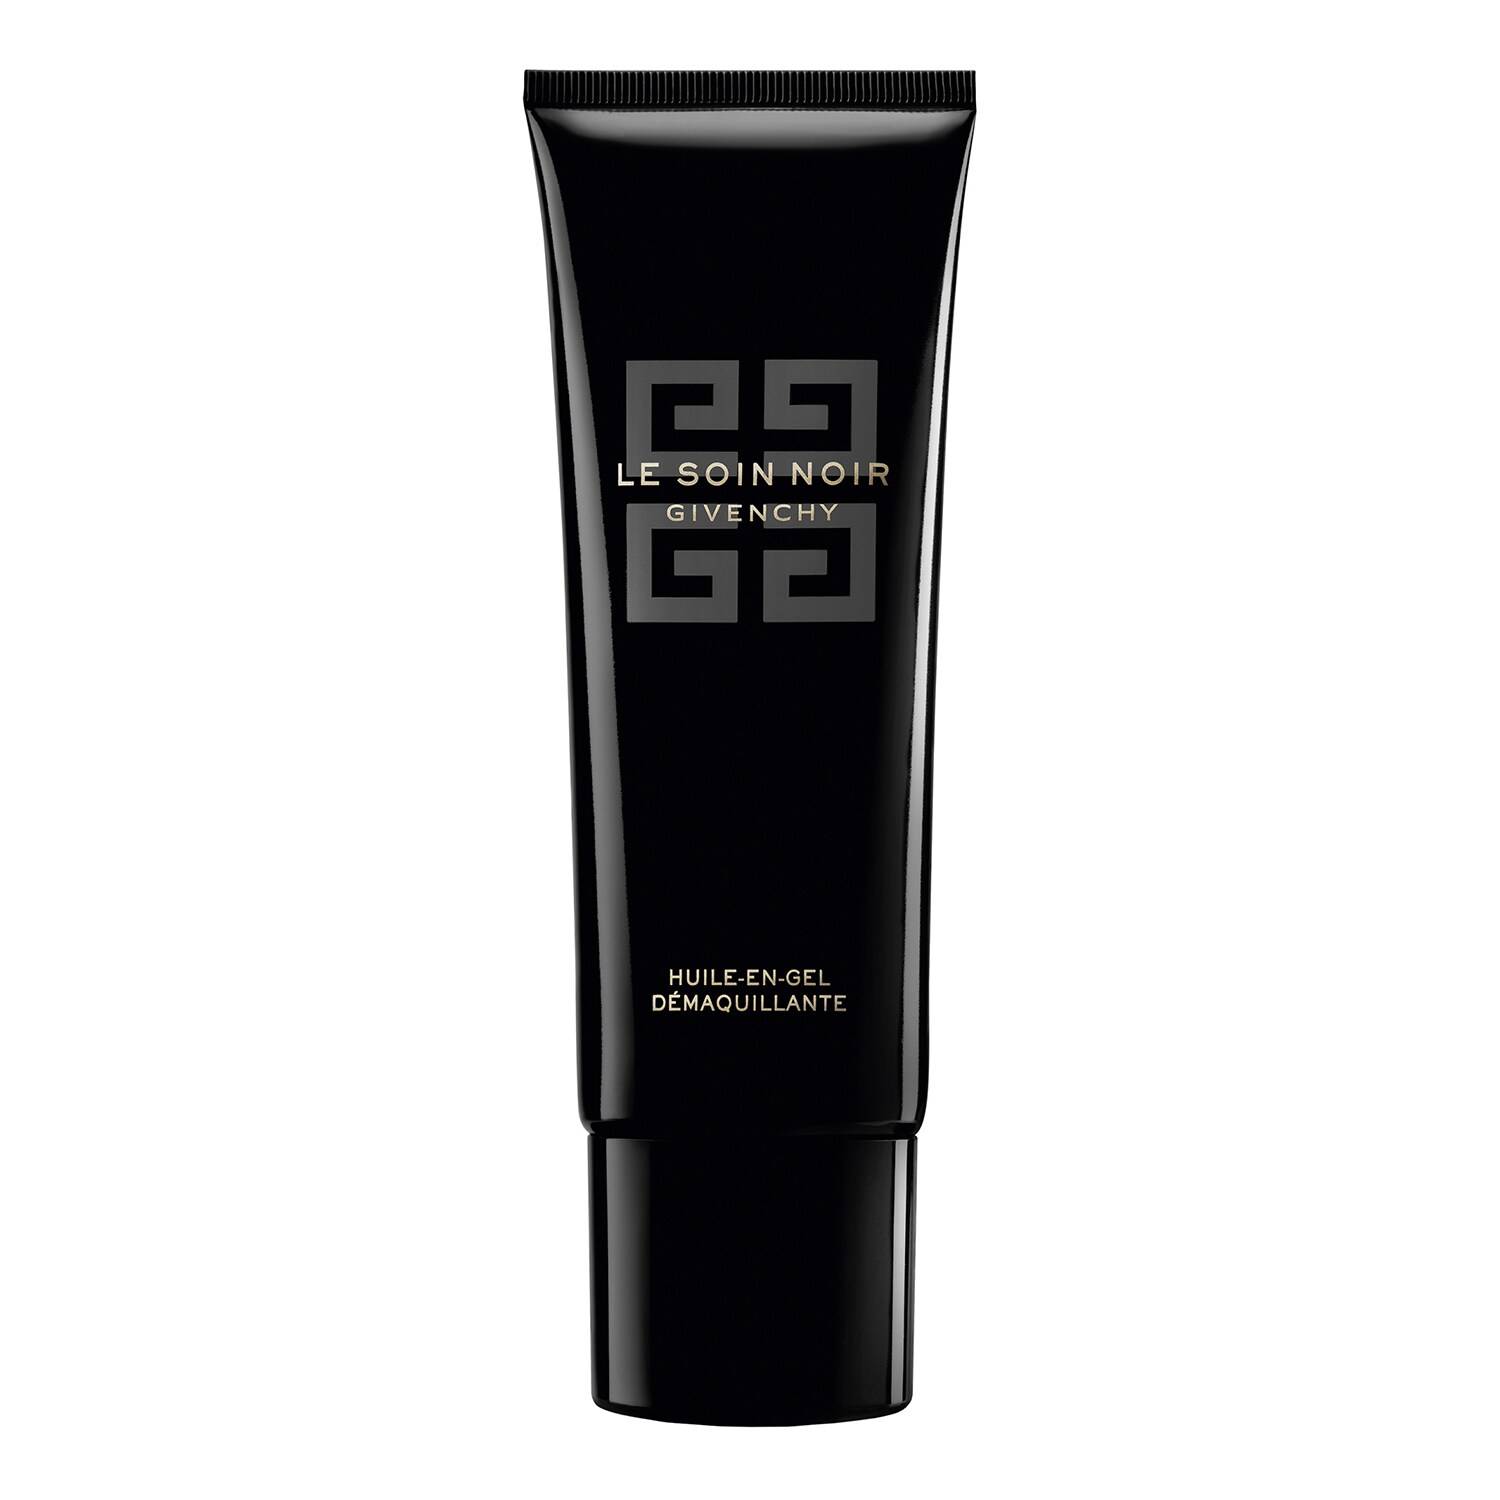 Givenchy Le Soin Noir Oil-In-Gel Makeup Remover 125 Ml